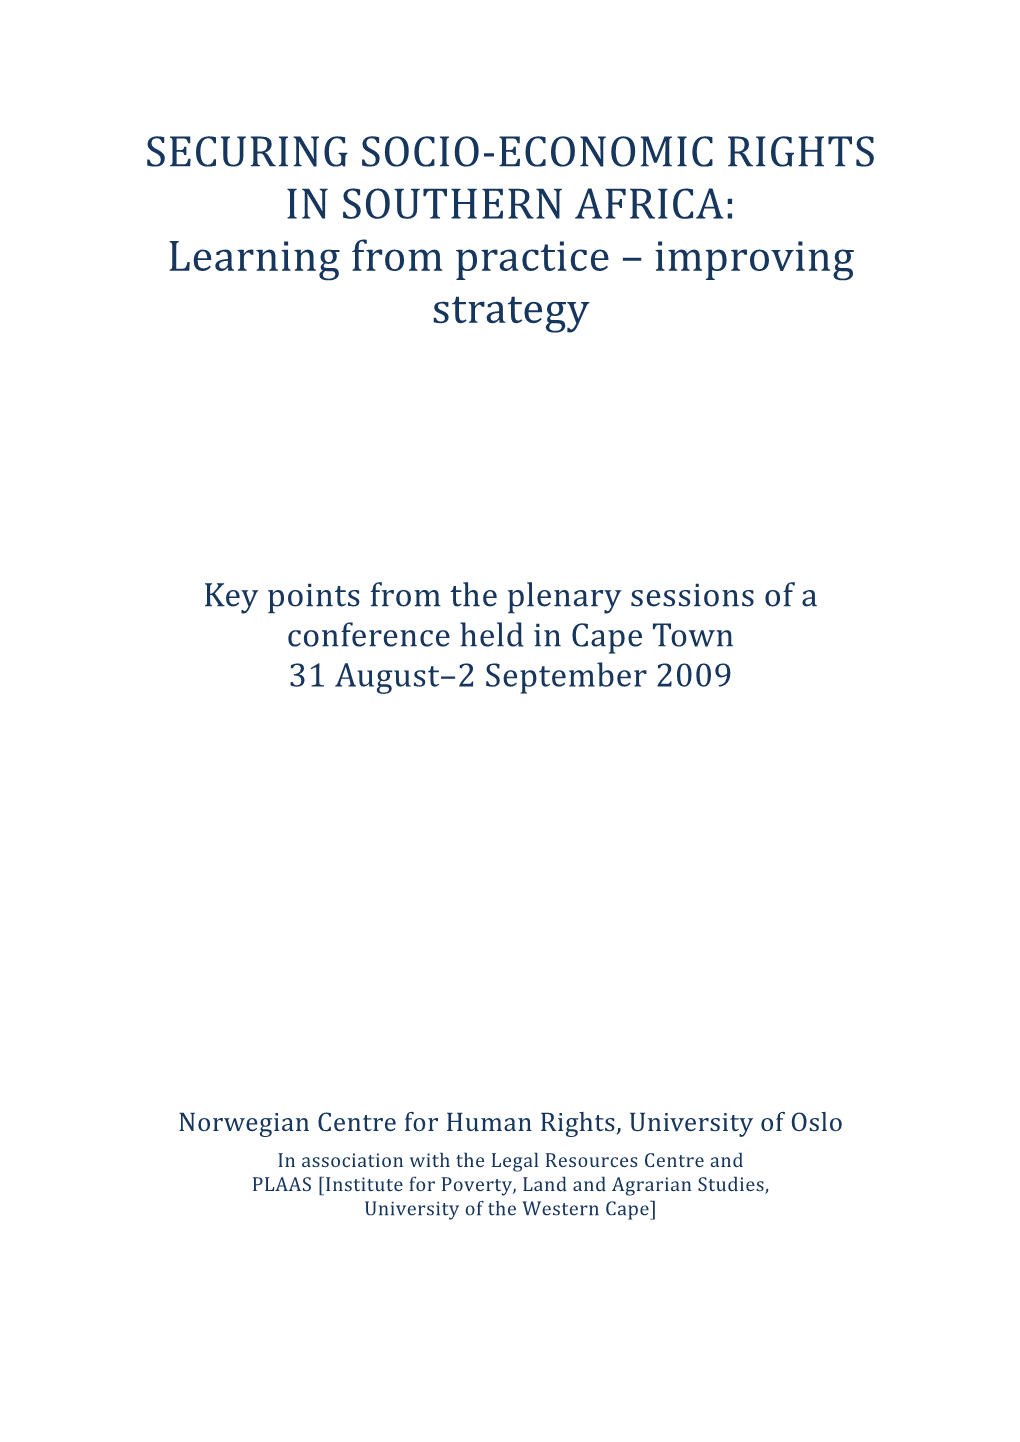 SECURING SOCIO‐ECONOMIC RIGHTS in SOUTHERN AFRICA: Learning from Practice – Improving Strategy